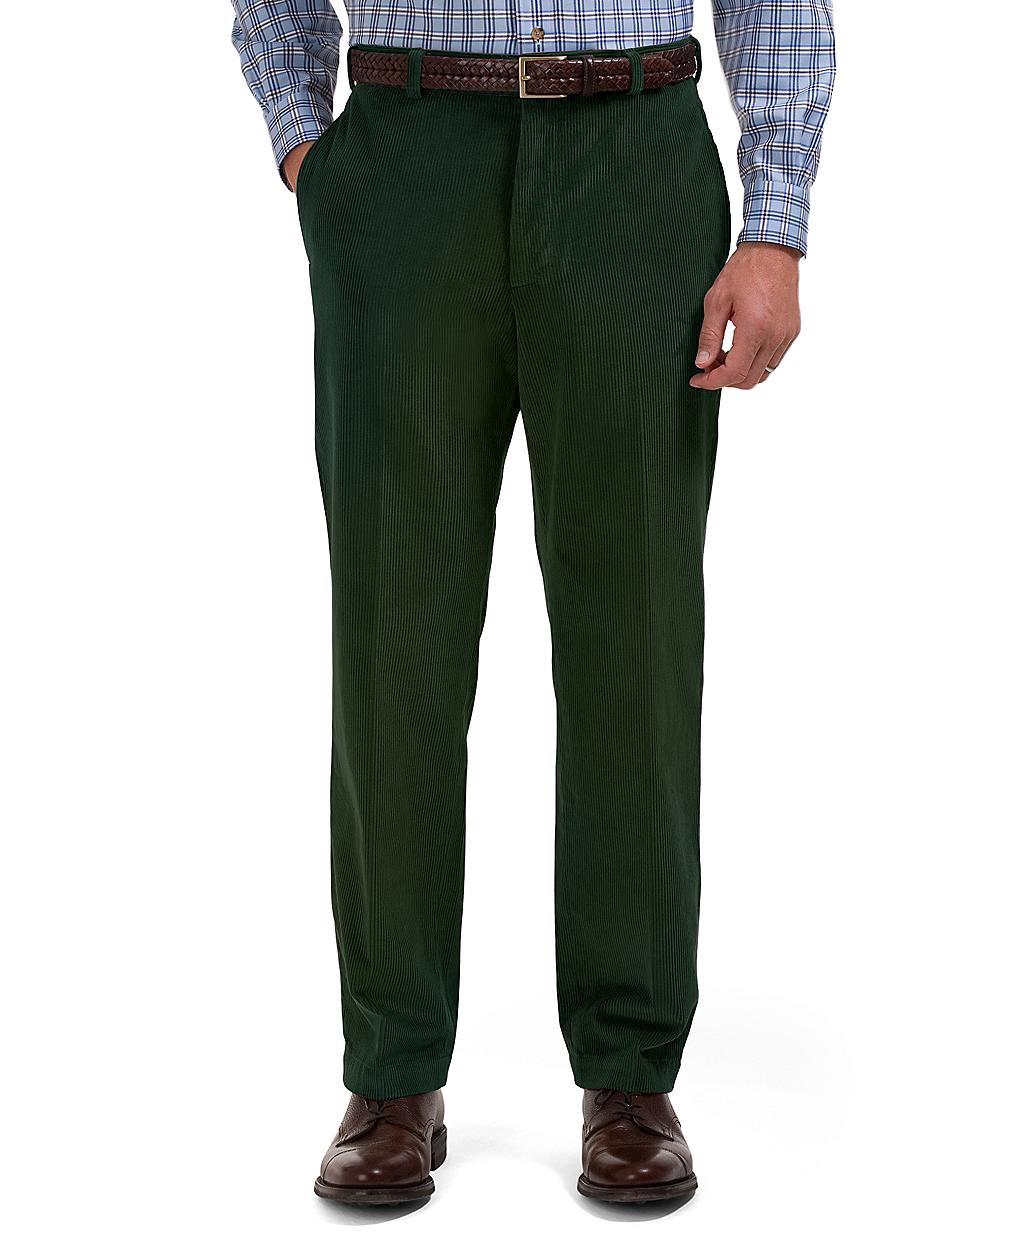 Brooks Brothers Hudson Fit Eightwale Corduroy Pants in Green for Men - Lyst